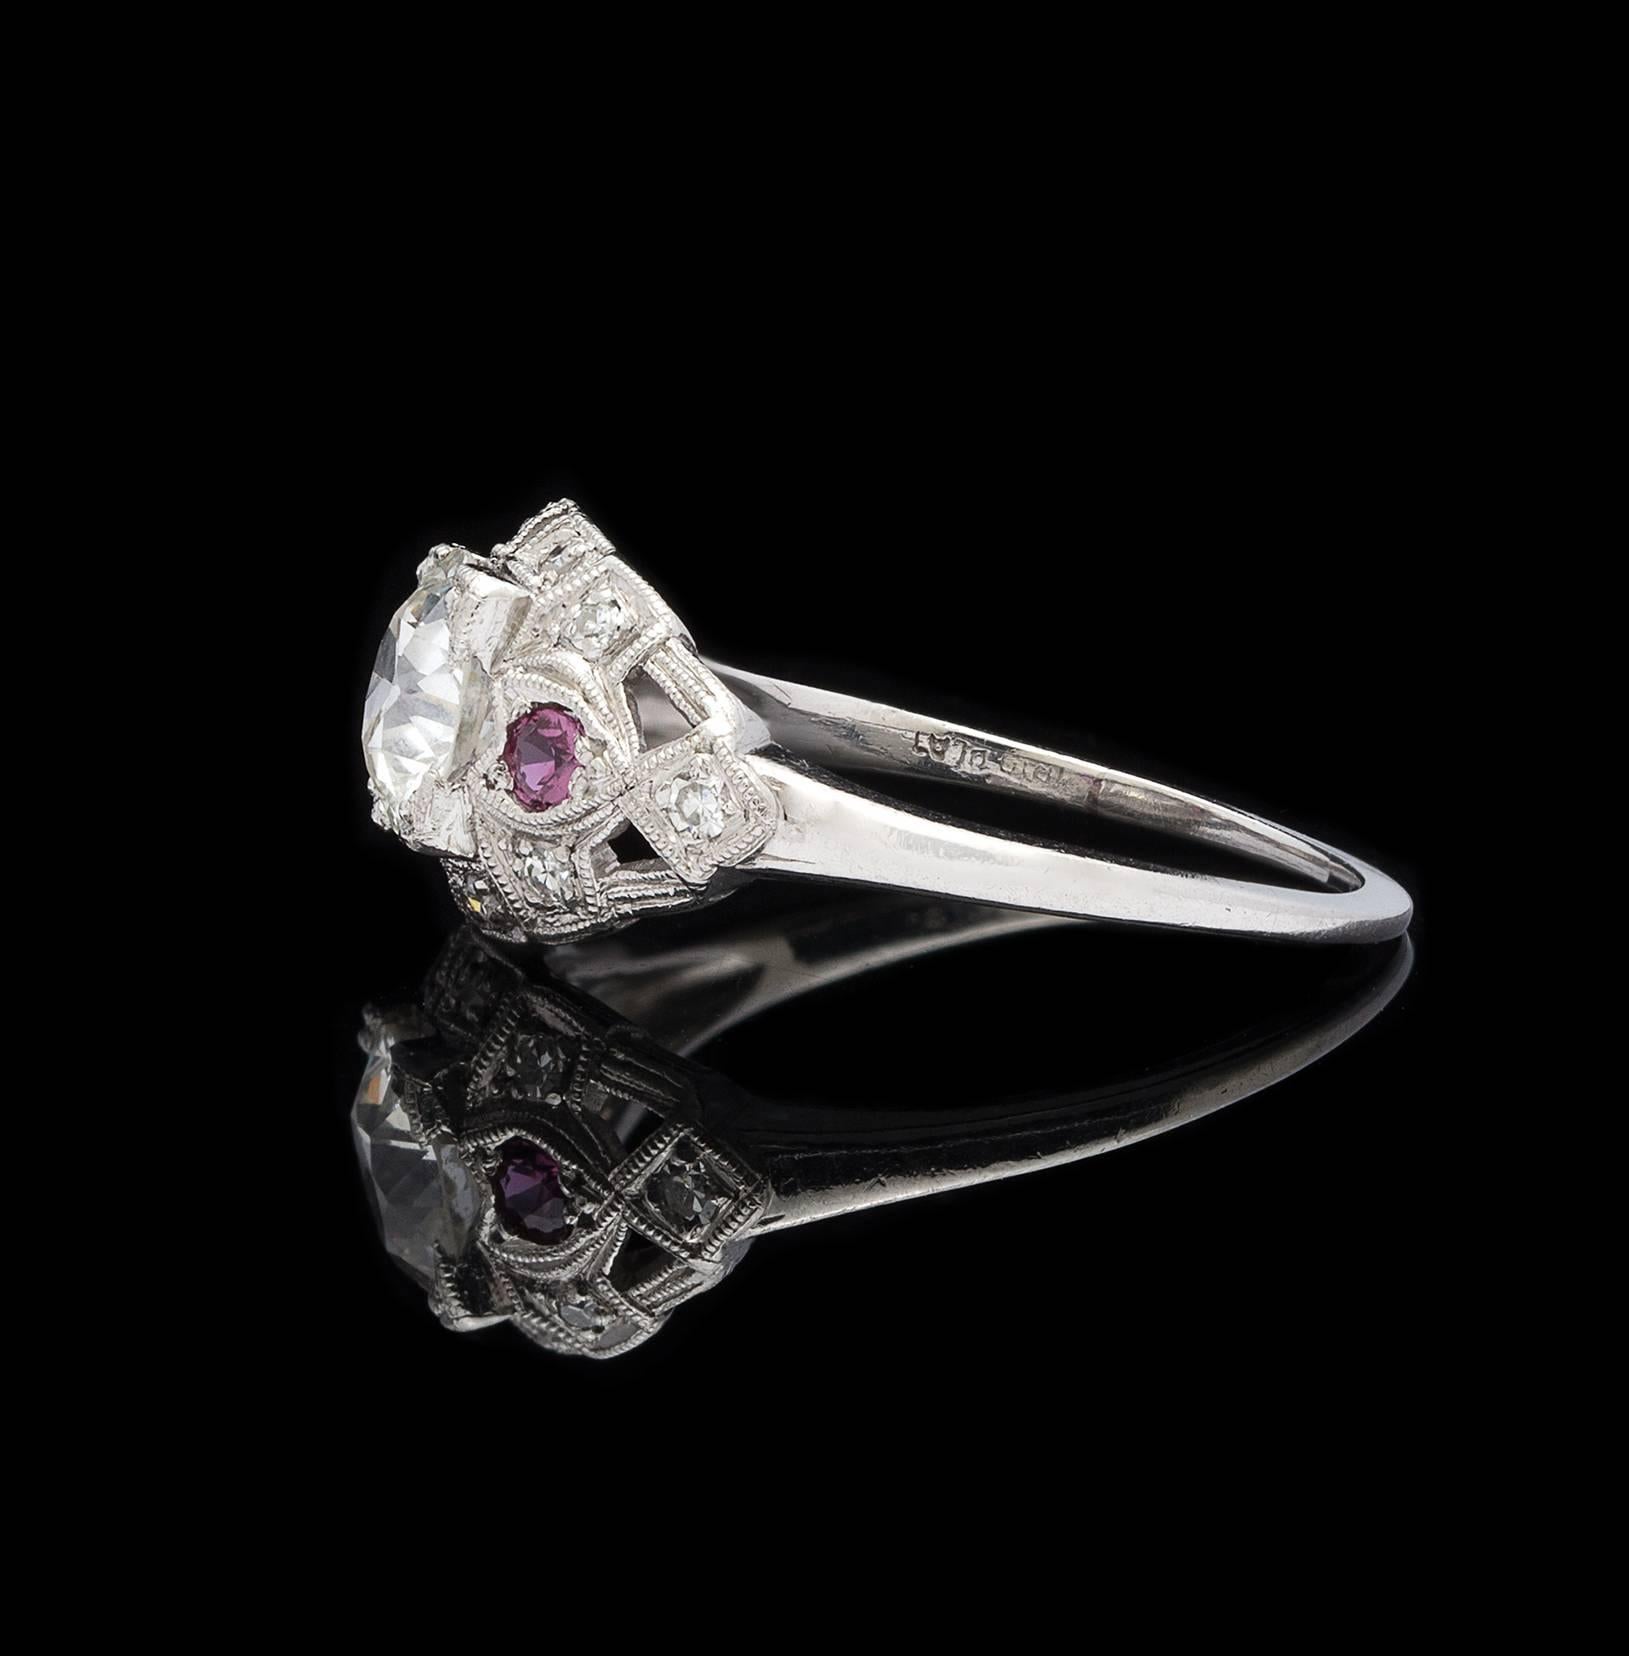 A charming ring featuring an old European-cut diamond weighing 0.82 carat, graded G-H color and VS-SI clarity, the slightly domed platinum mounting highlighted with two round-cut rubies and 11 single-cut diamonds. Estimated total diamond weight for